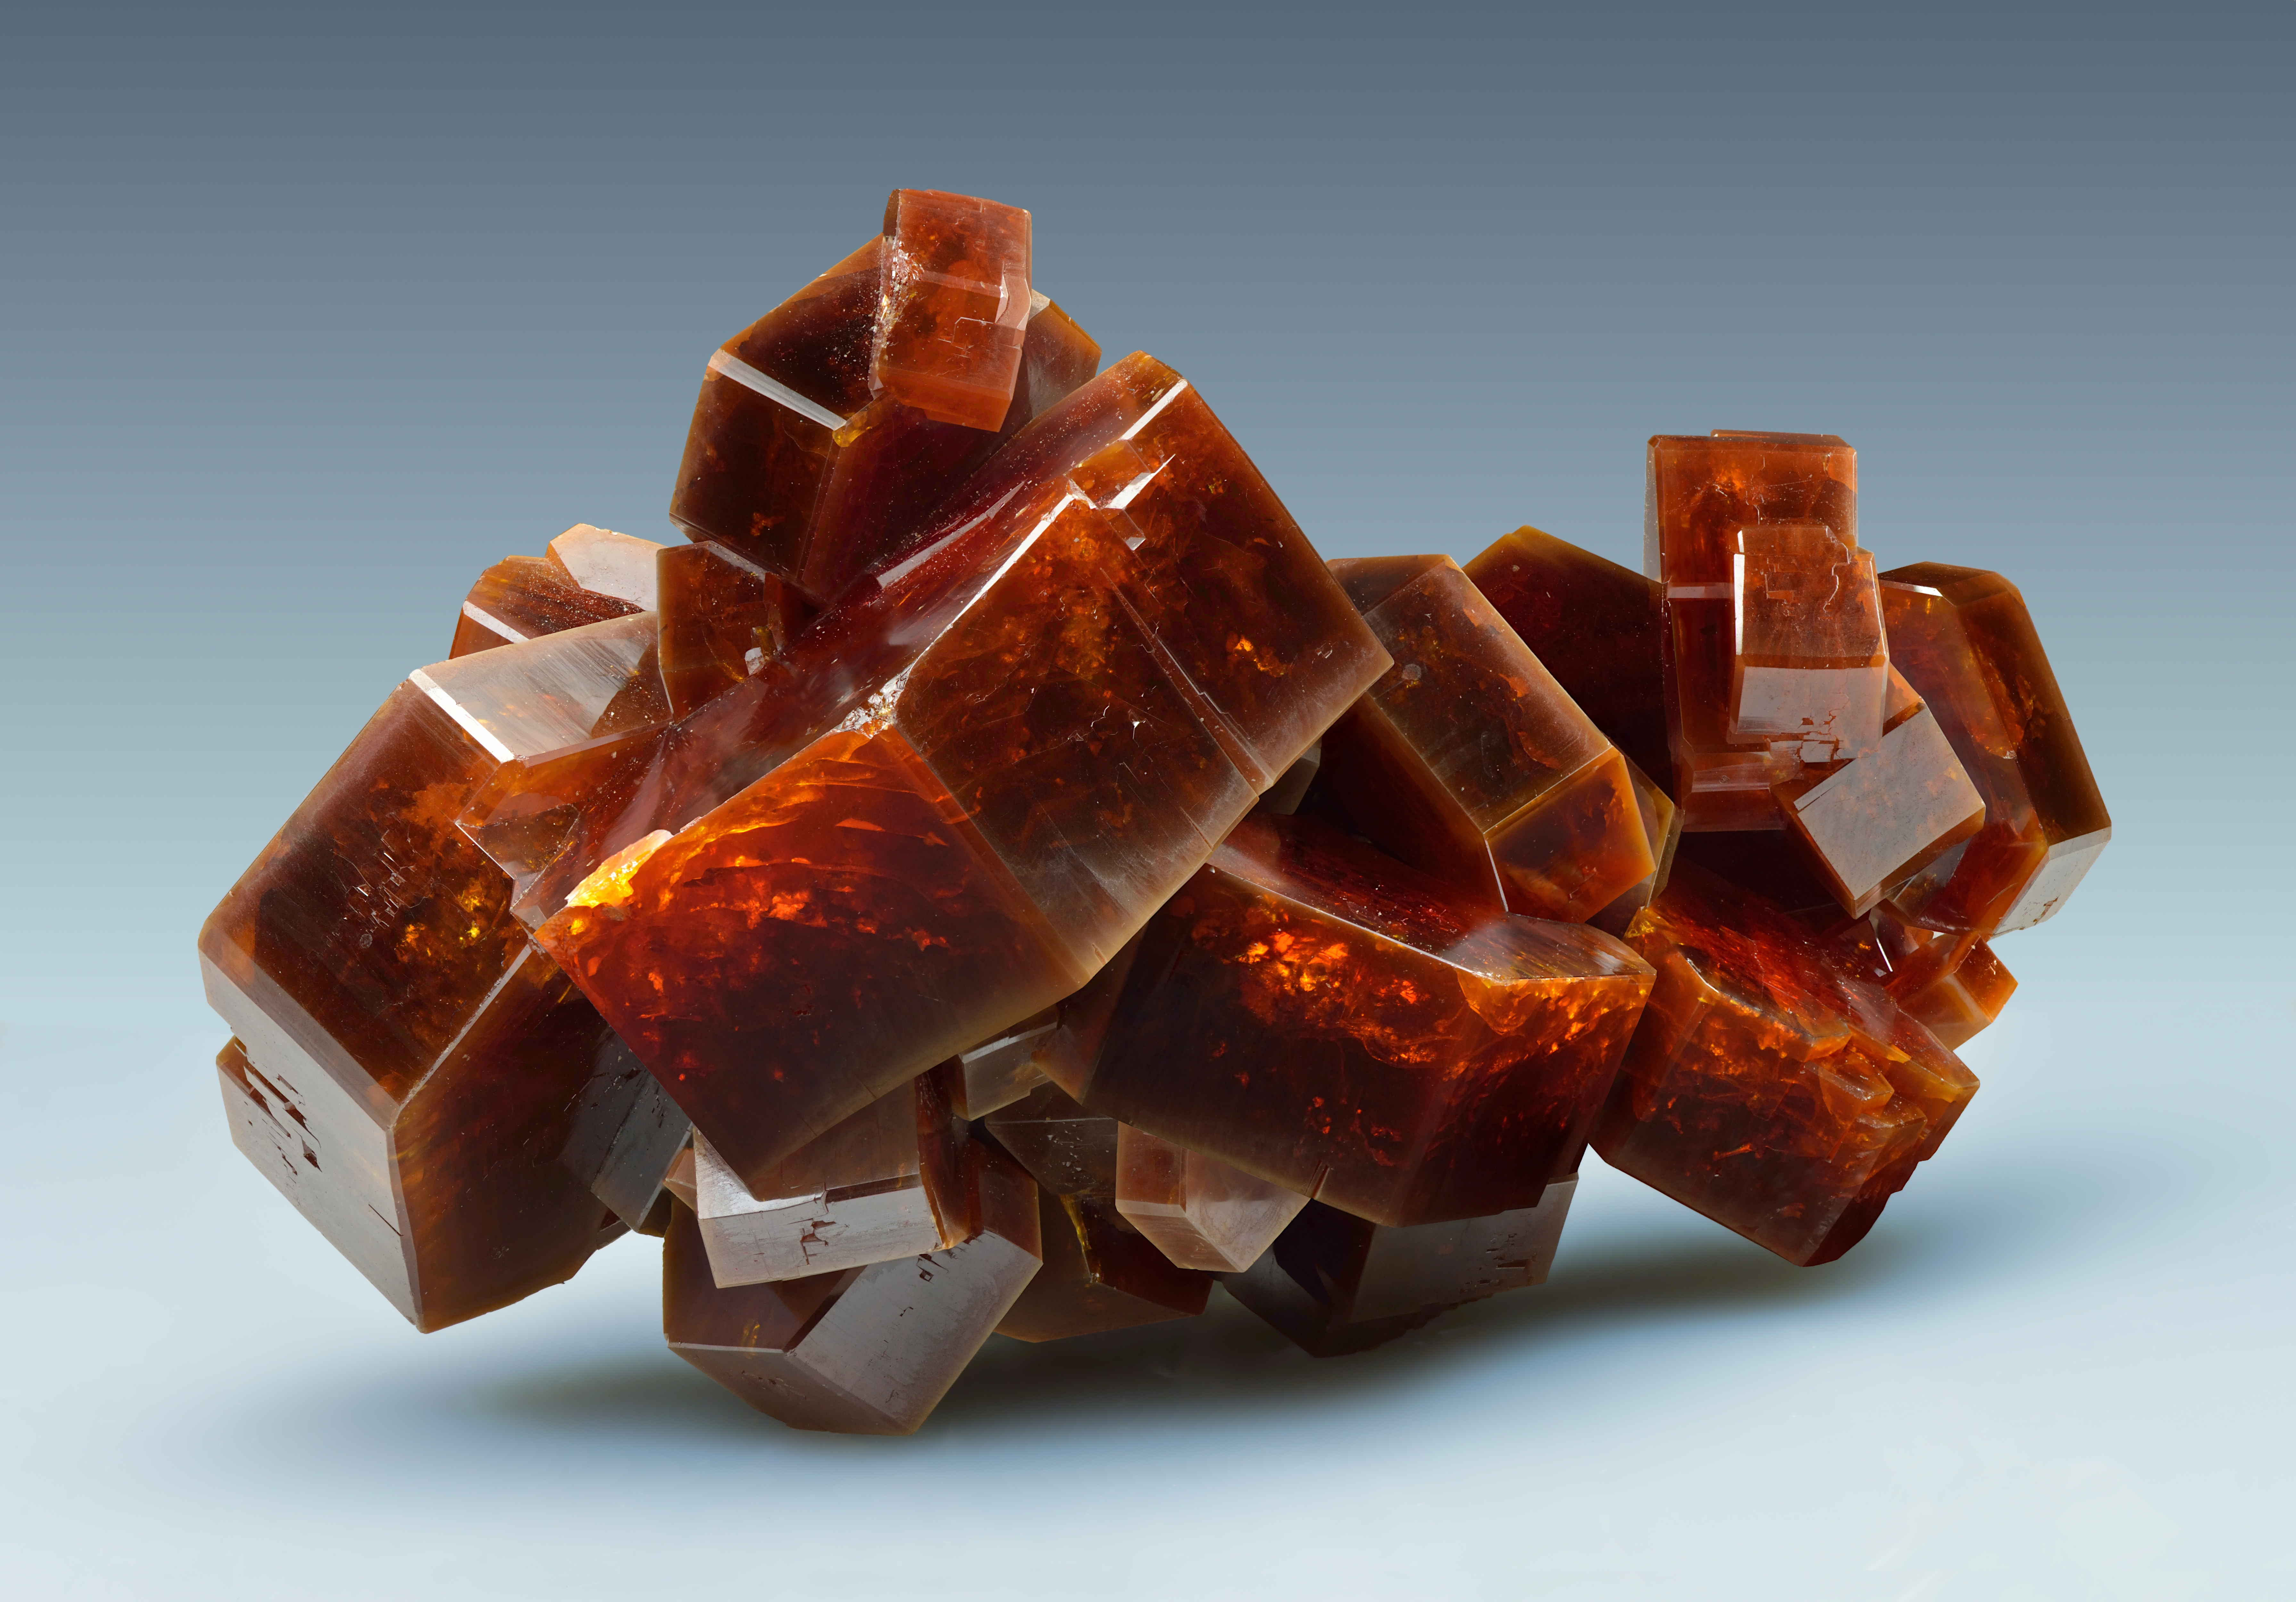 The mineral vanadinite, which has notably hexagonal-shaped crystals that group together in clusters. The mineral is orange-red in color.